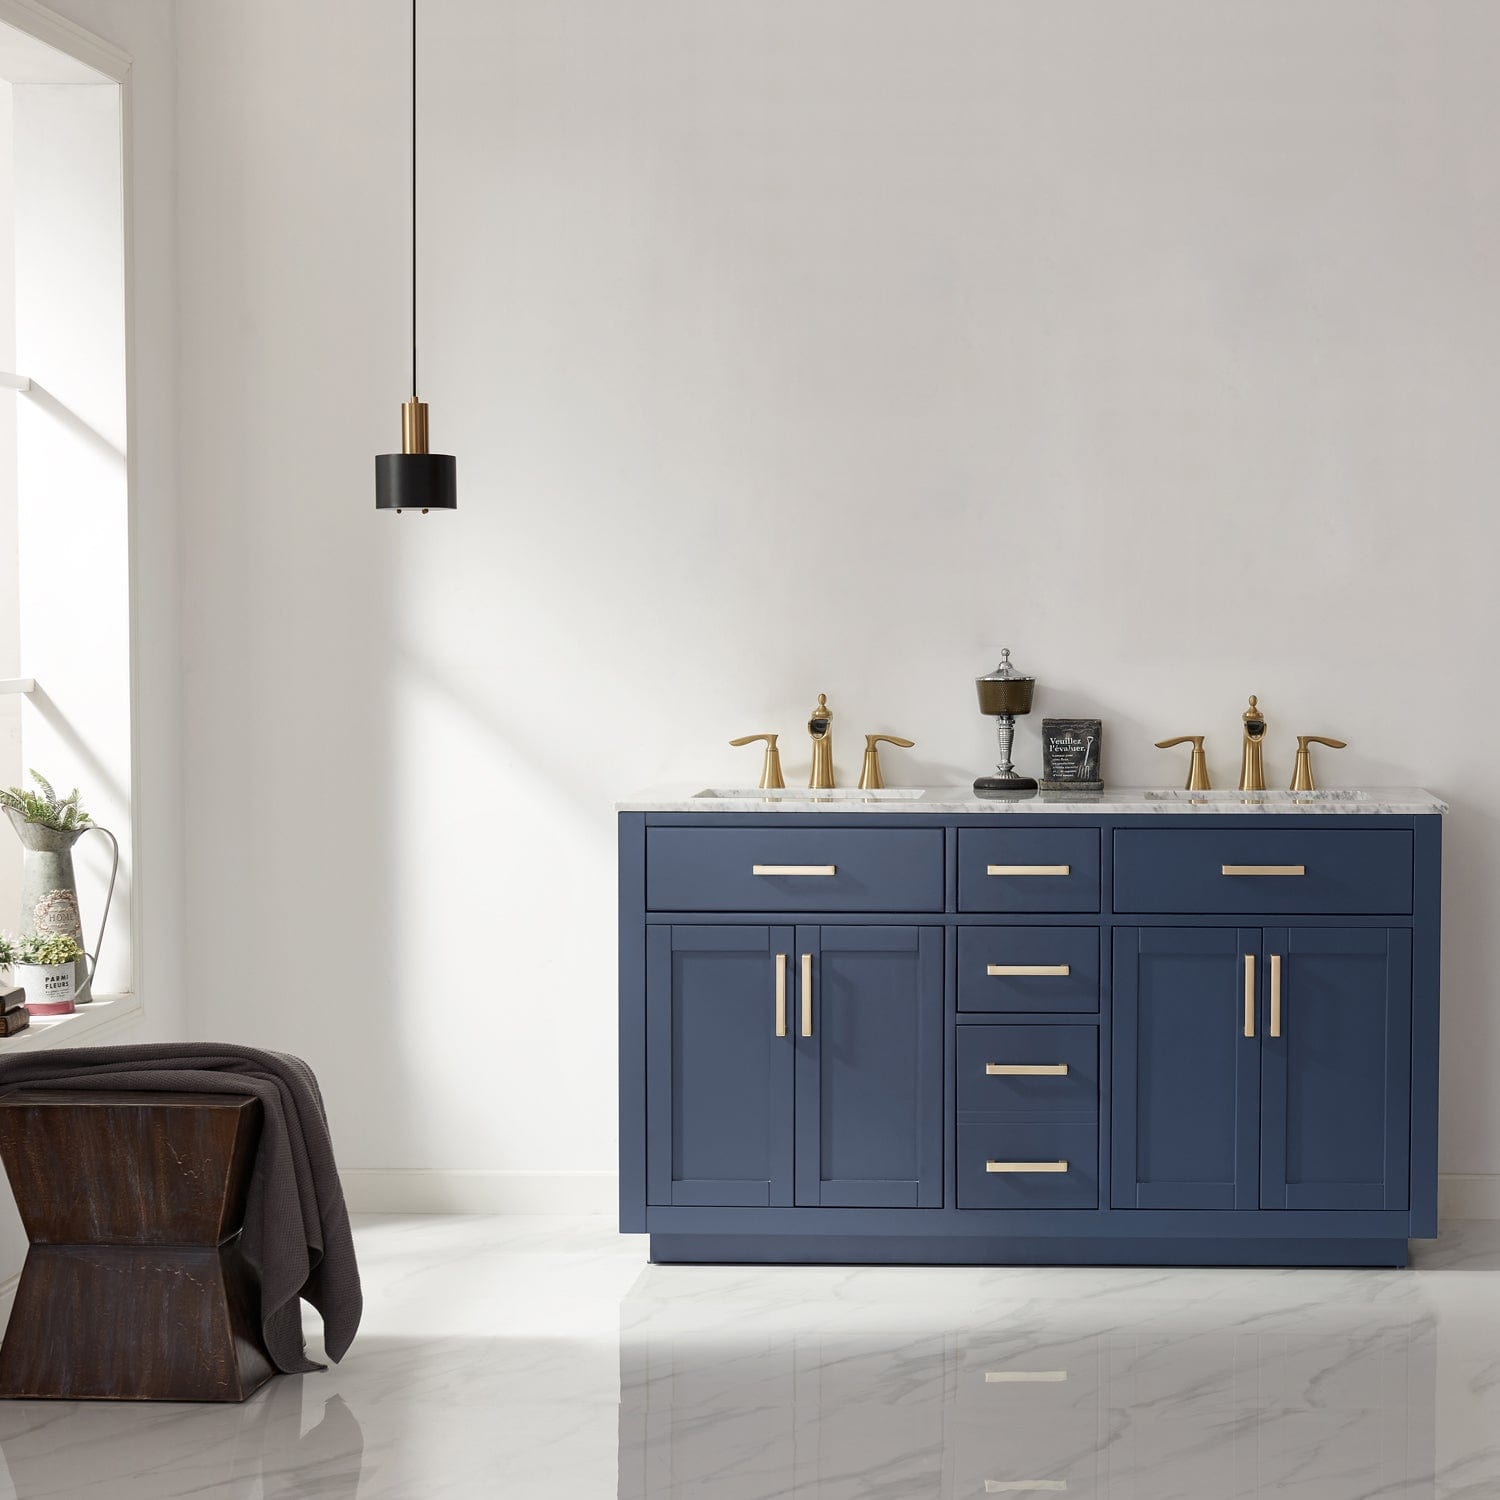 Altair Ivy 60" Double Bathroom Vanity Set in Royal Blue and Carrara White Marble Countertop without Mirror 531060-RB-CA-NM - Molaix631112971249Vanity531060-RB-CA-NM